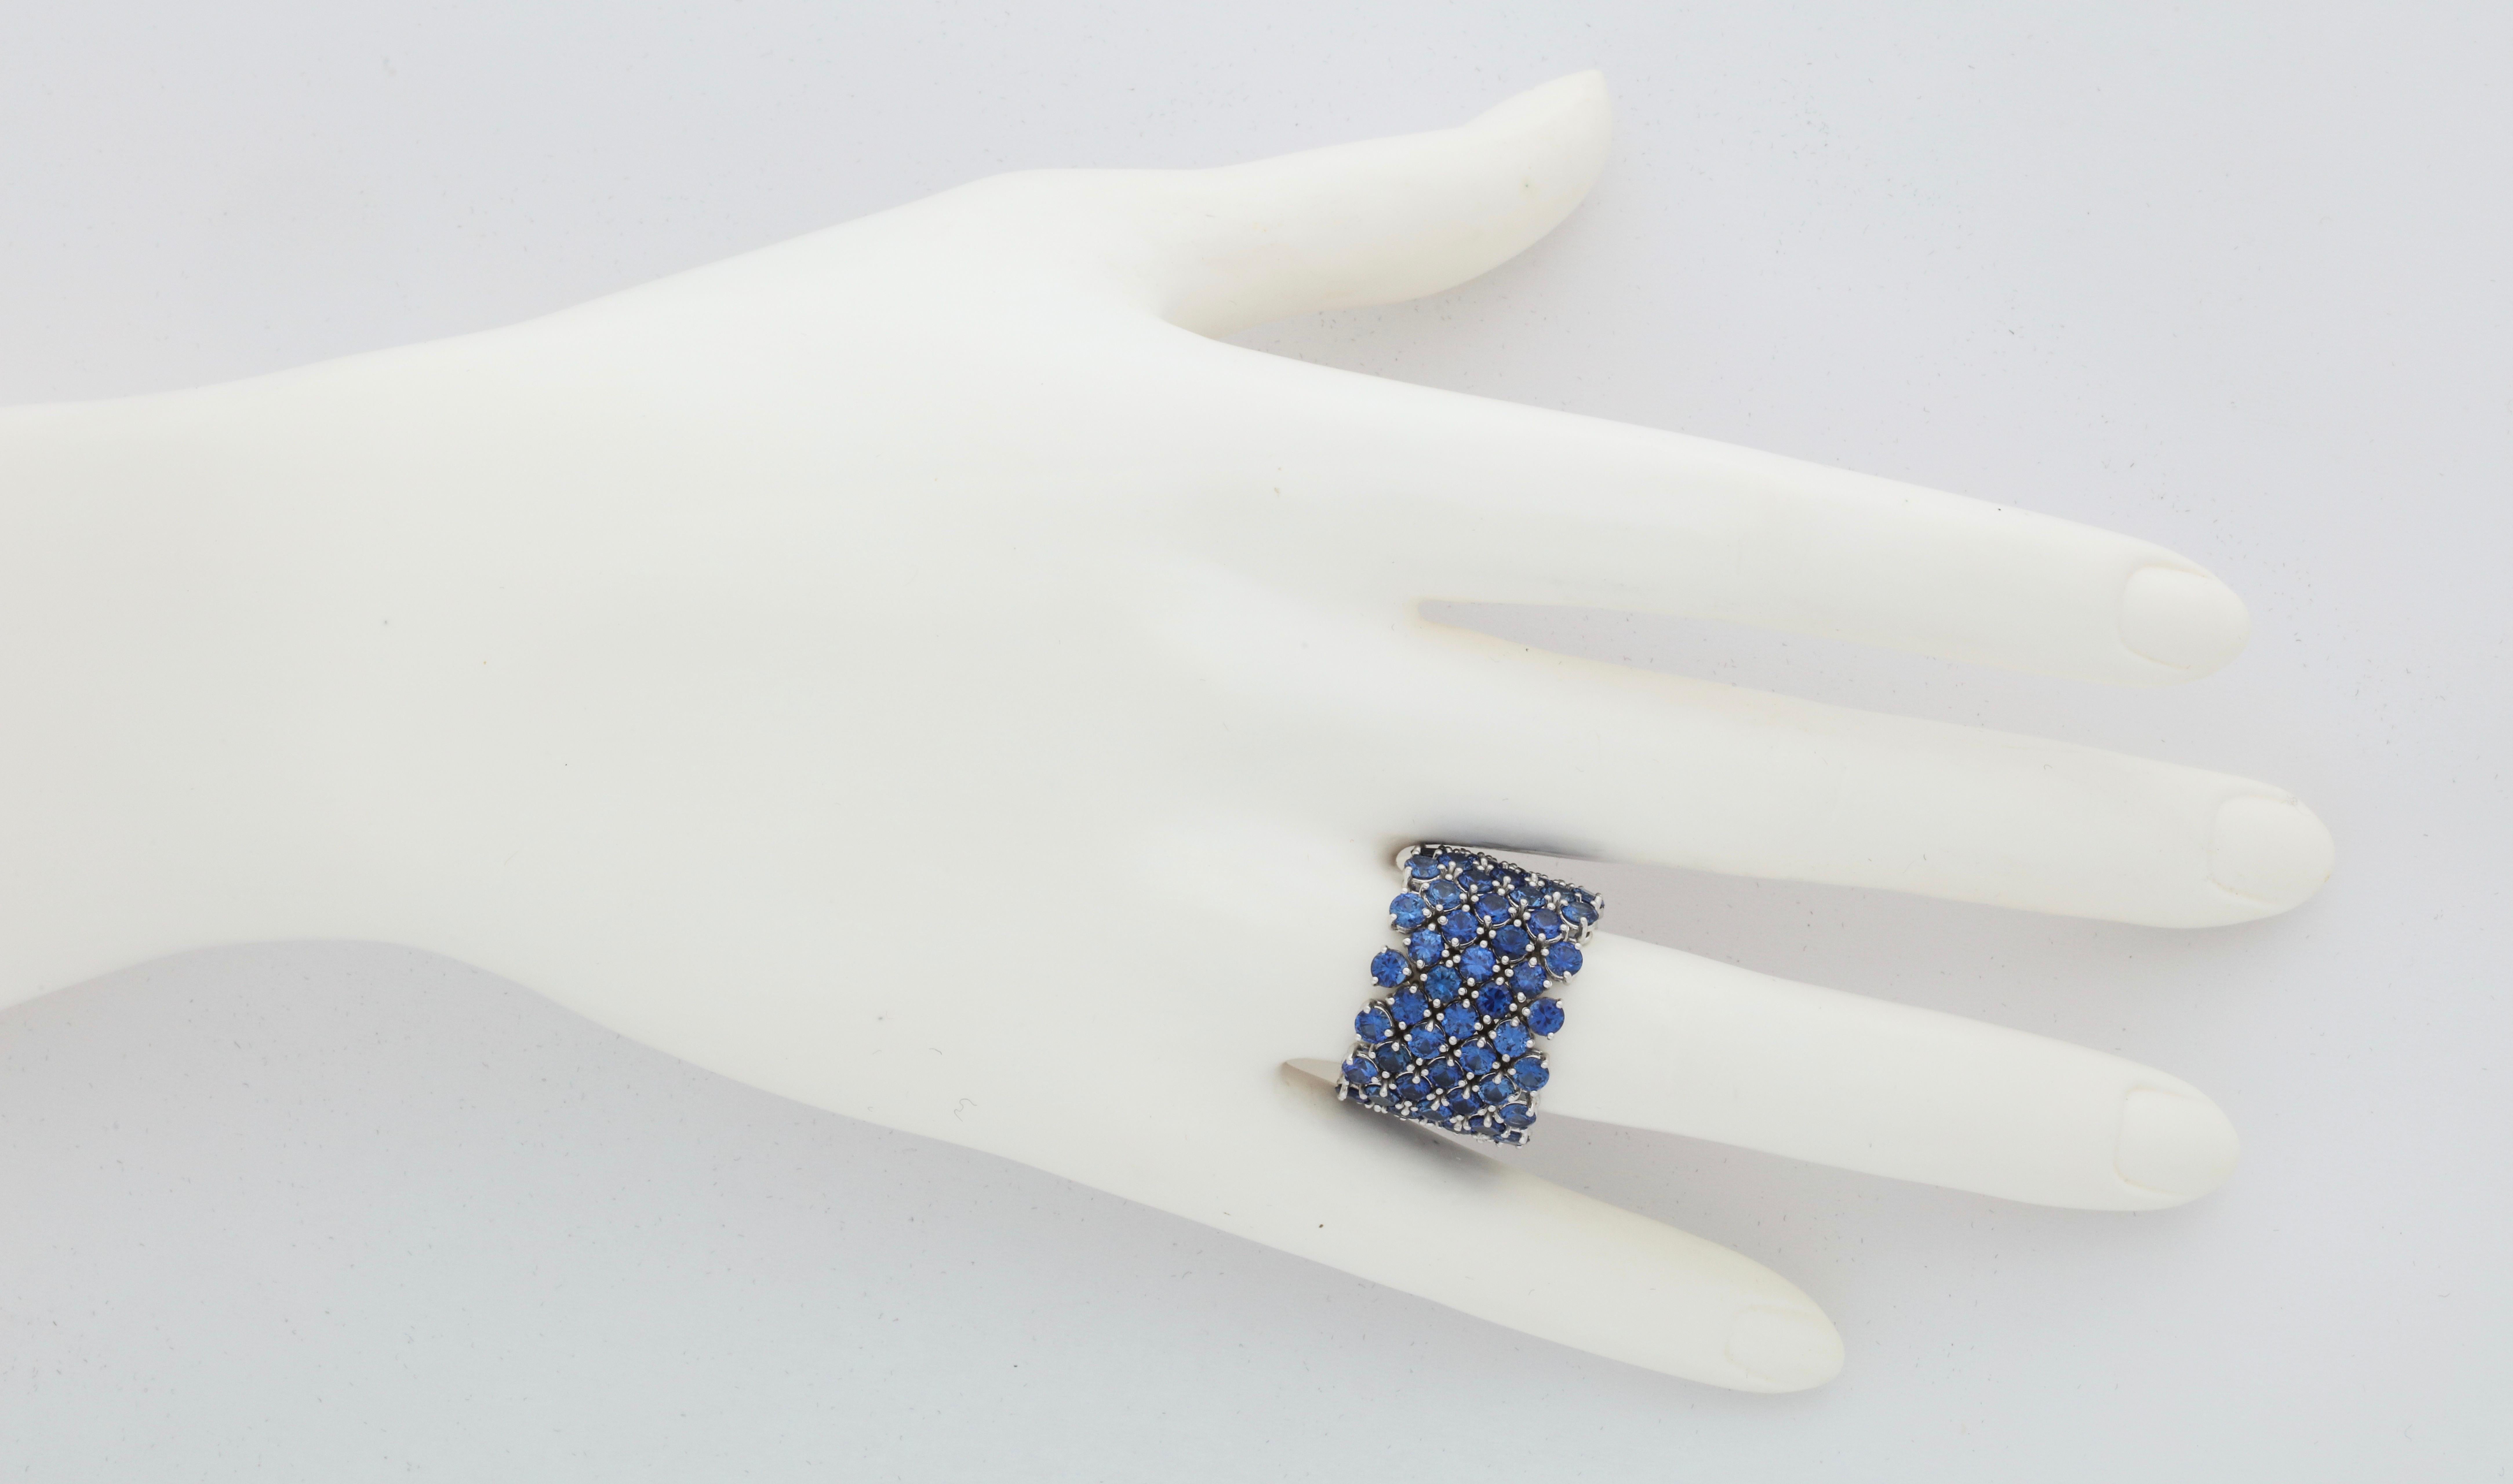 This ring is simply the most flexible, comfortable, colorful and elegant wide band that you will ever own.  Once you experience the effect of such superior craftsmanship you will be smitten.   Seven rows containing 98 perfectly matched bright, blue